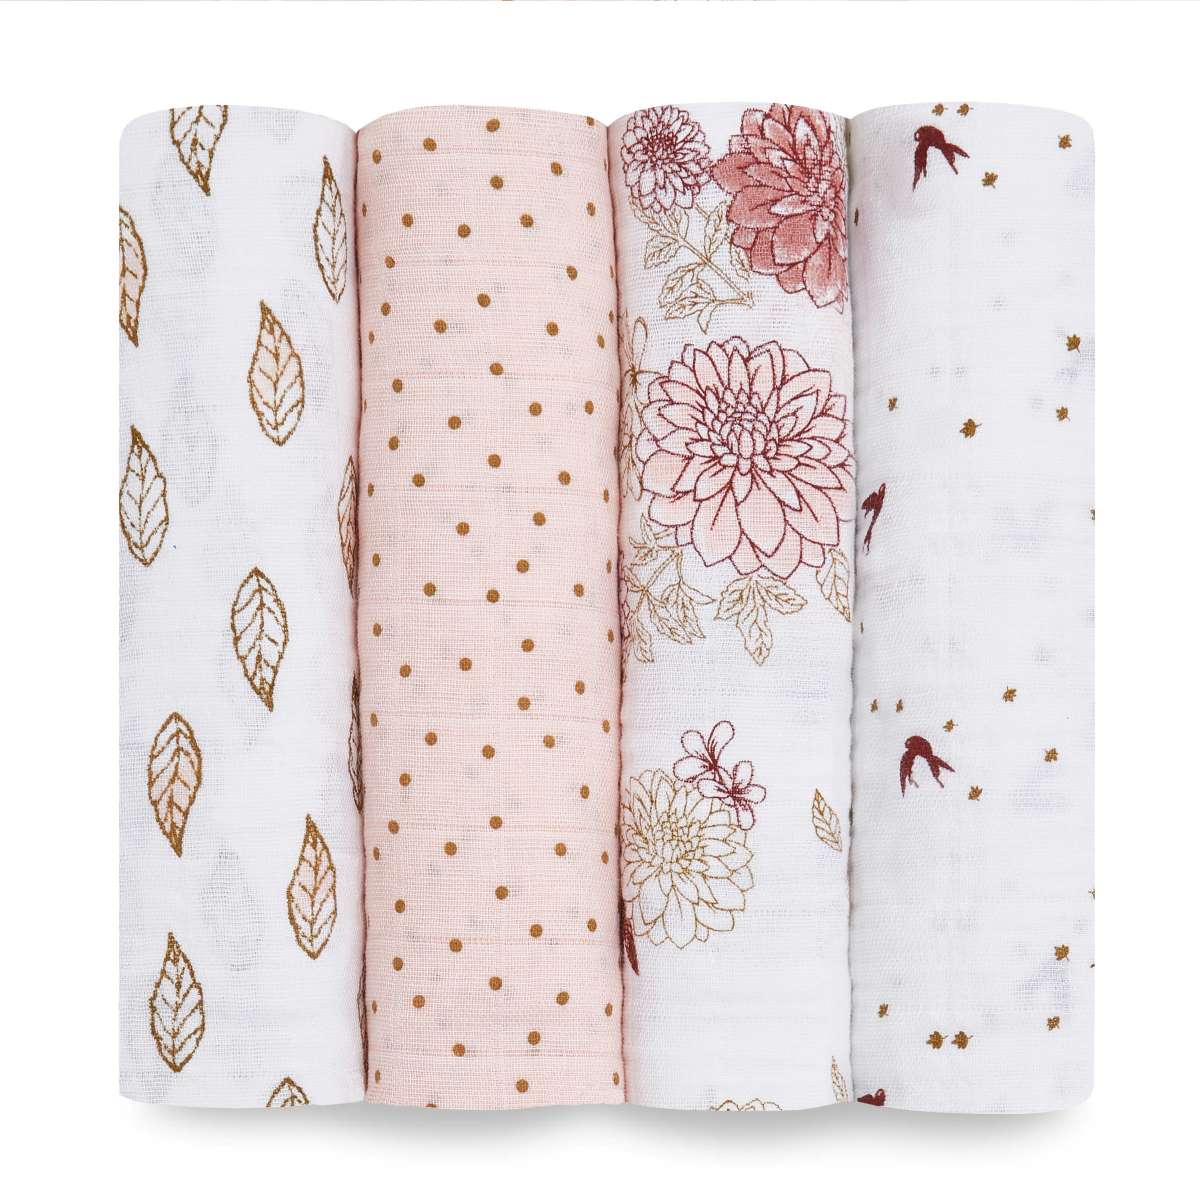 100% cotton muslin aden + anais baby swaddle blankets offer a combination of breathability, versatility, and softness. Pack of 4.  The fabric is pre-washed, ensuring that it is soft and gentle against a baby's delicate skin right from the start. 